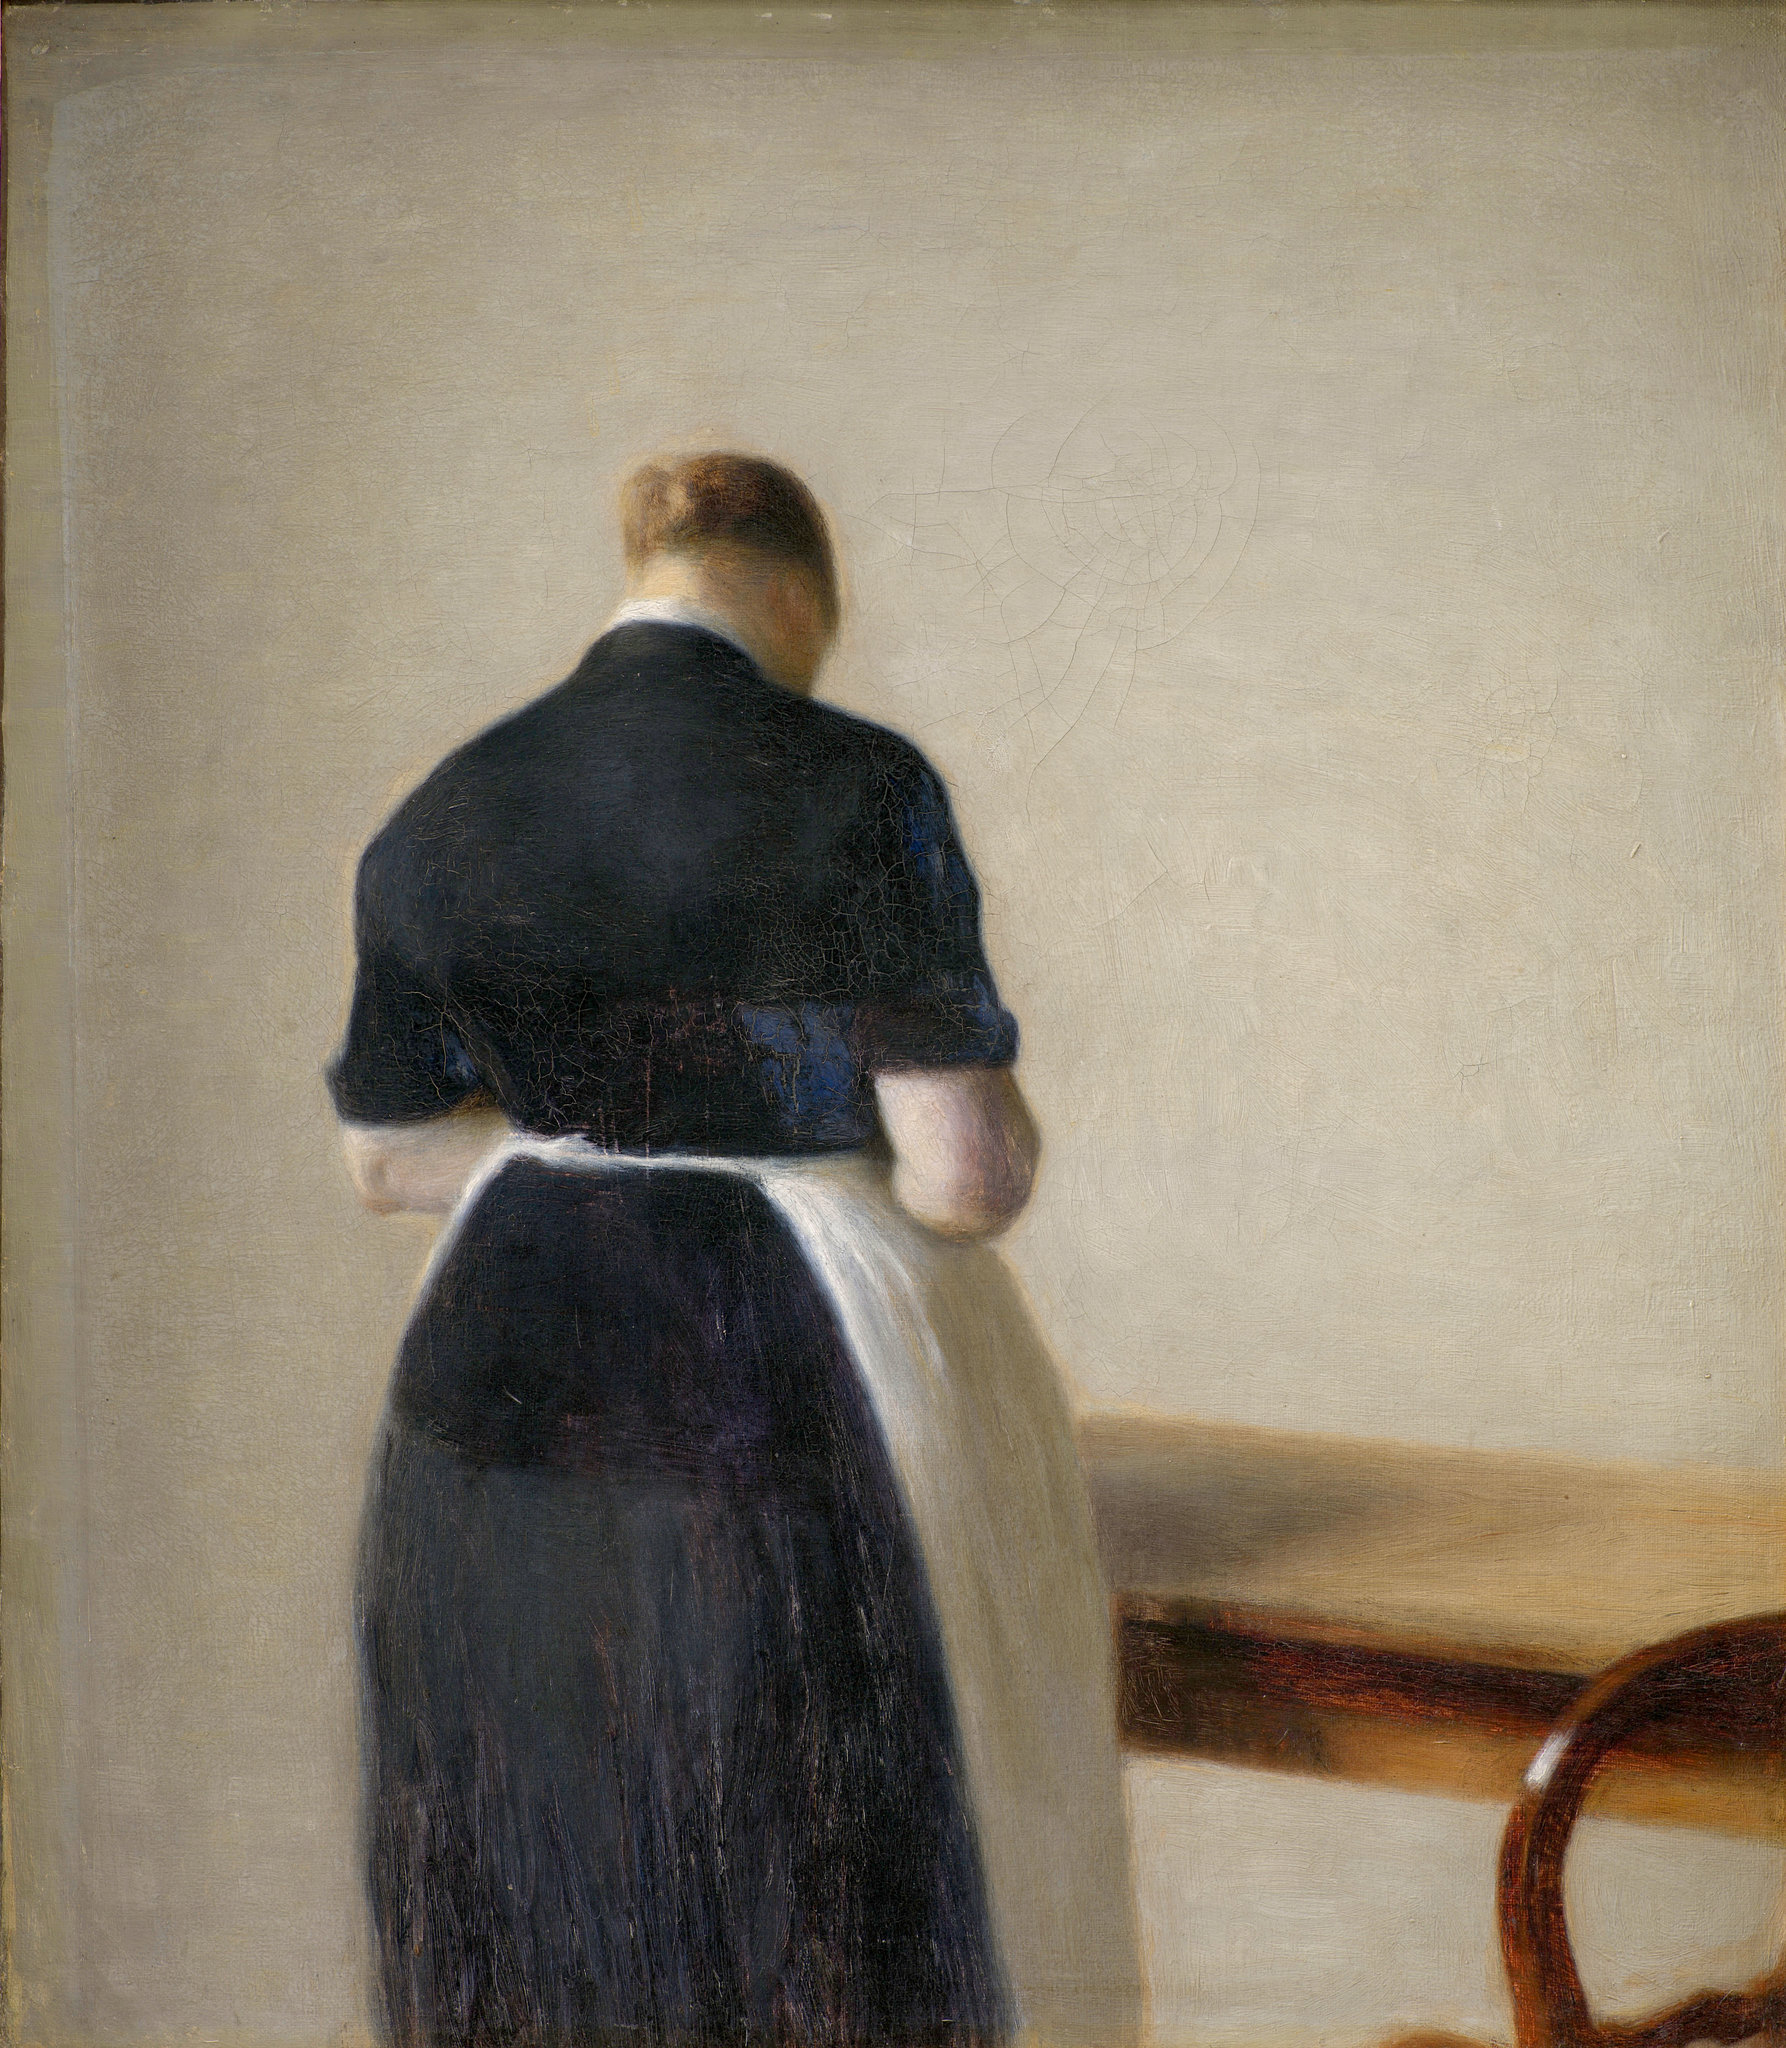   Vilhelm Hammershøi  Woman Seen from the Back, 1888 Image: © SMK – The National Gallery of Denmark 